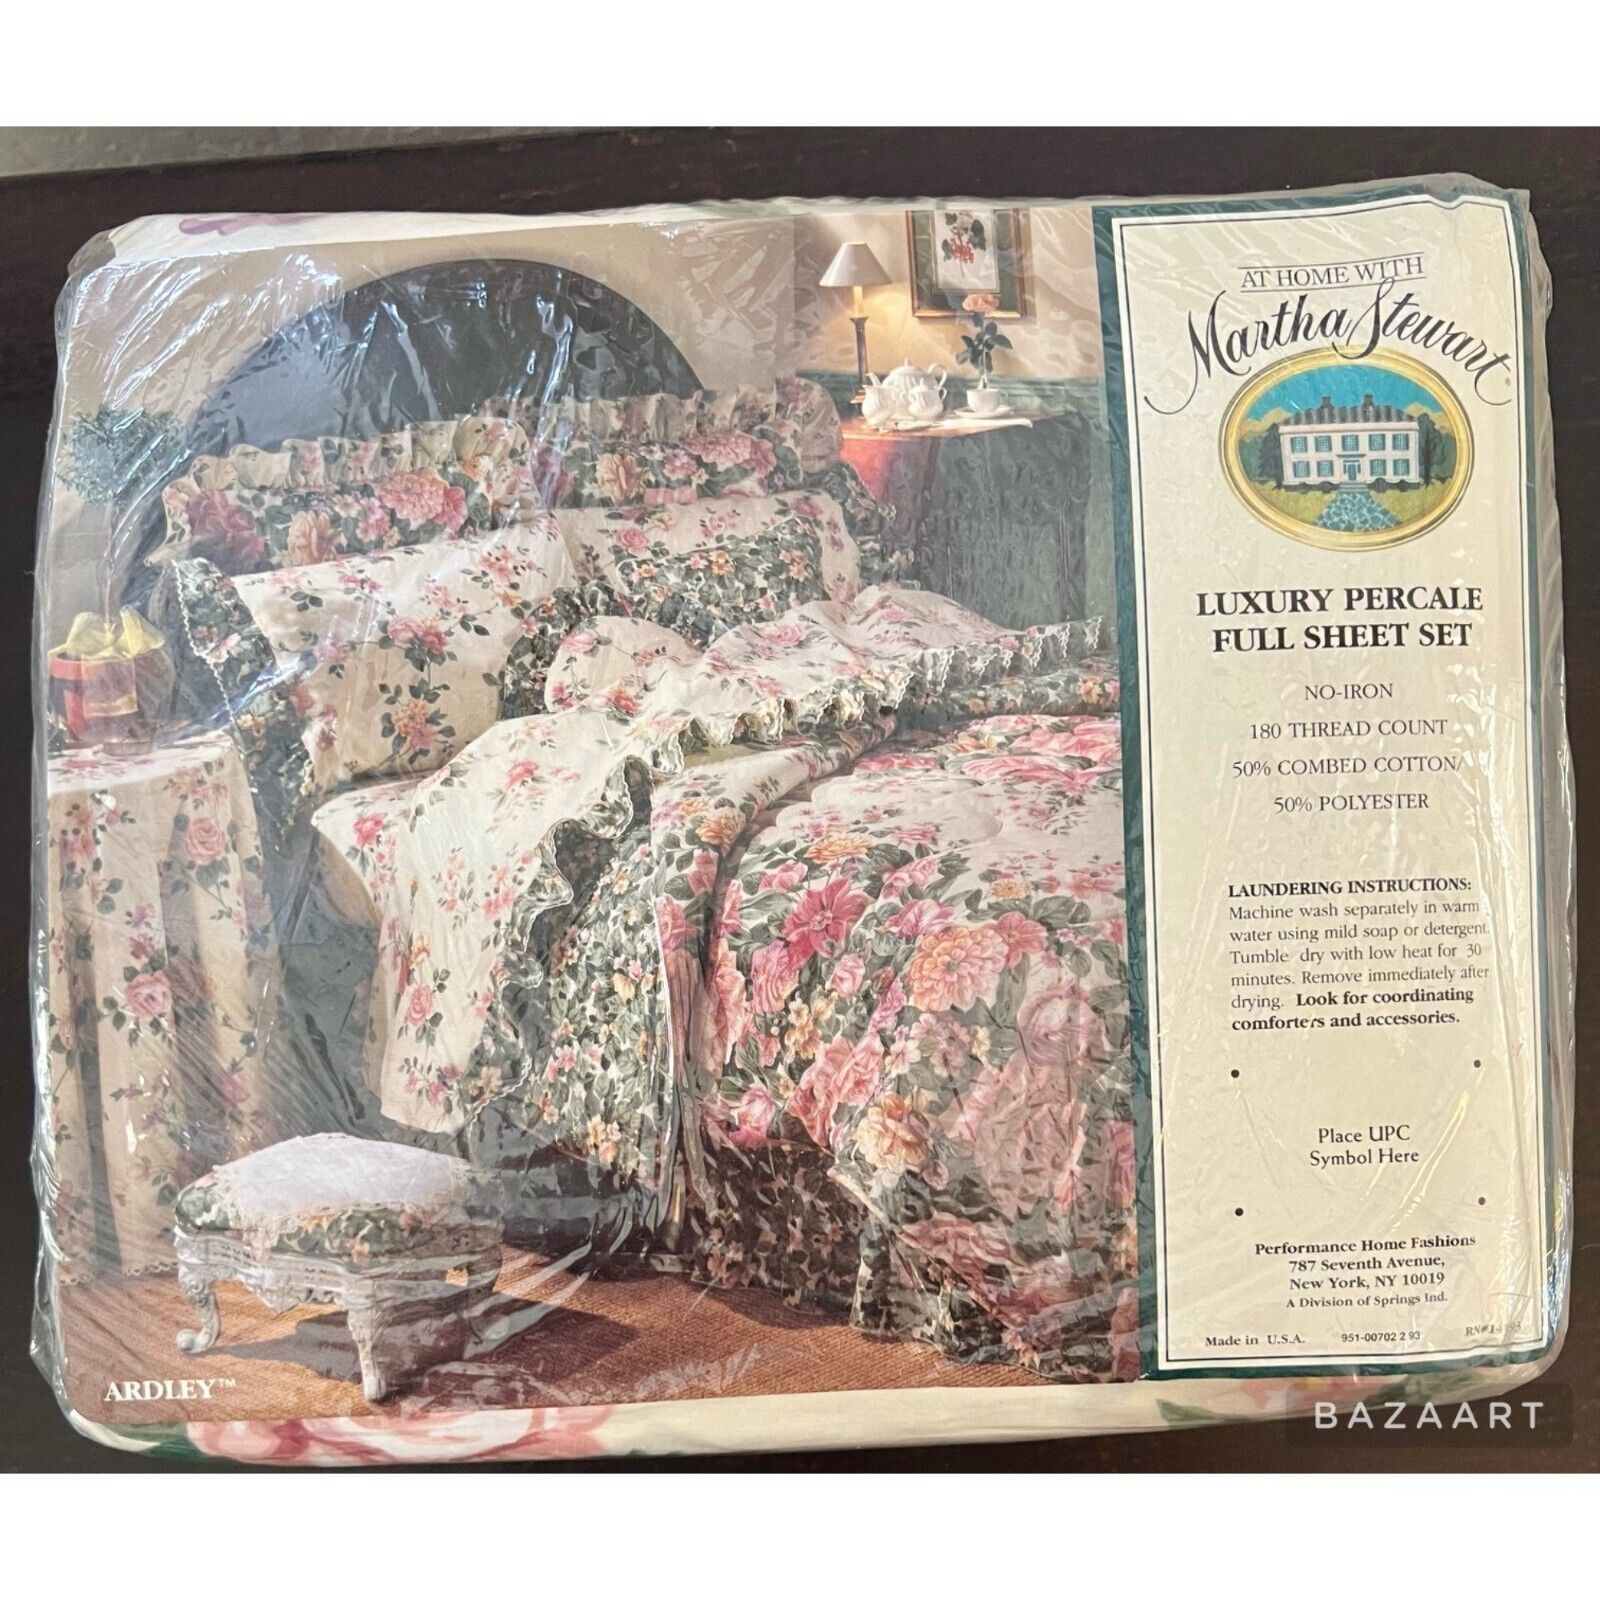 At Home With Martha Stewart Brand Full Size Sheet Set Brand New Sealed USA Made - $34.64